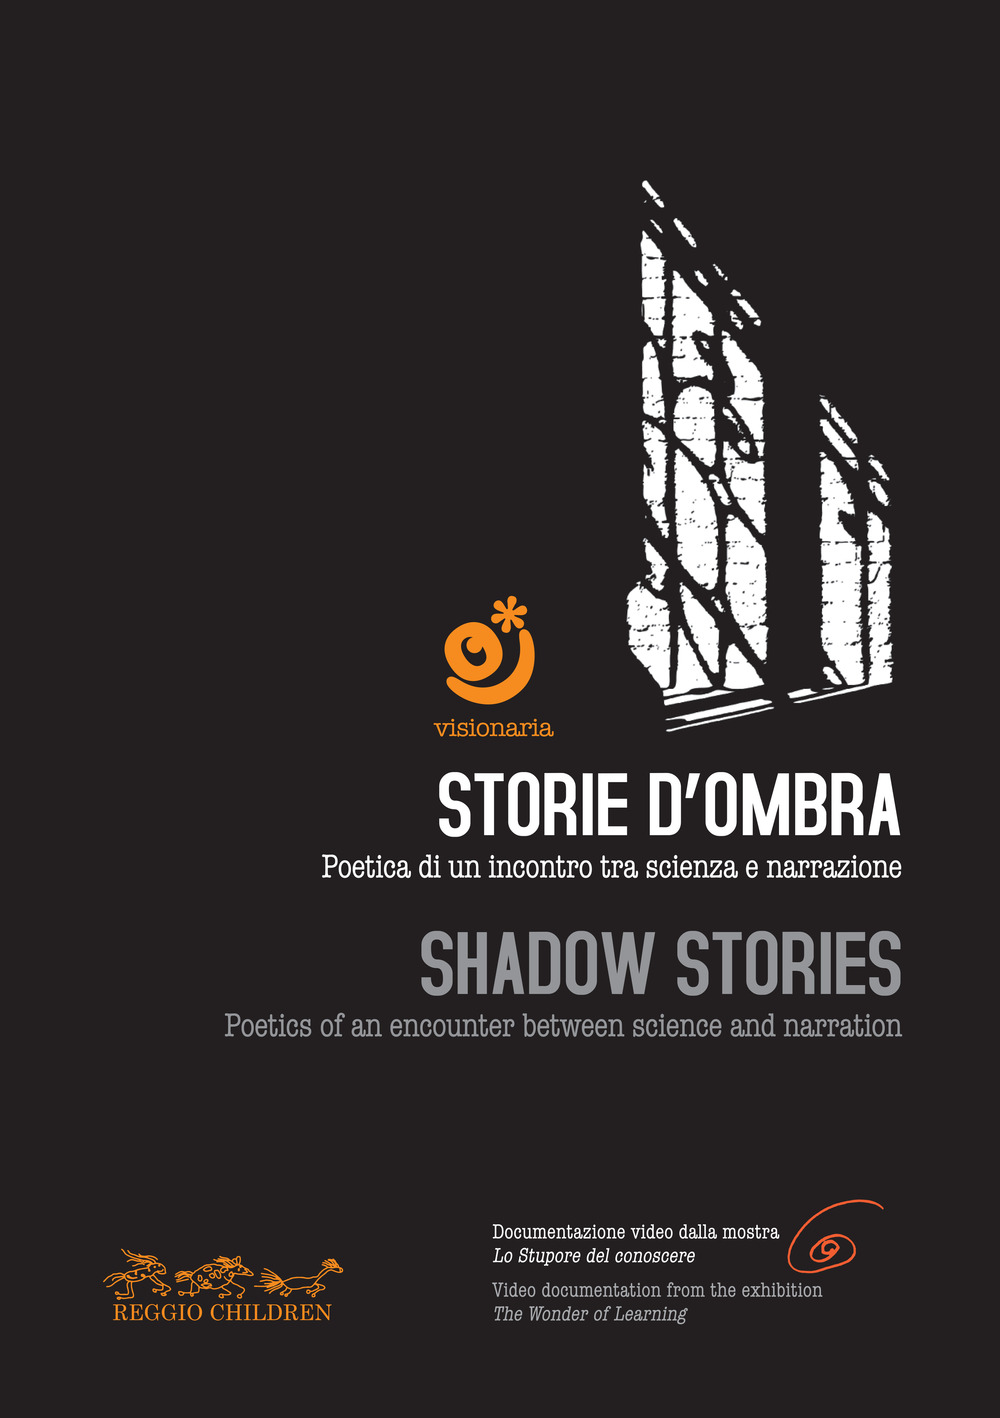 Storie d'ombra. Poetica di un incontro tra scienza e narrazione-Shadow stories. Poetics of an encounter between science and narration. Con DVD video